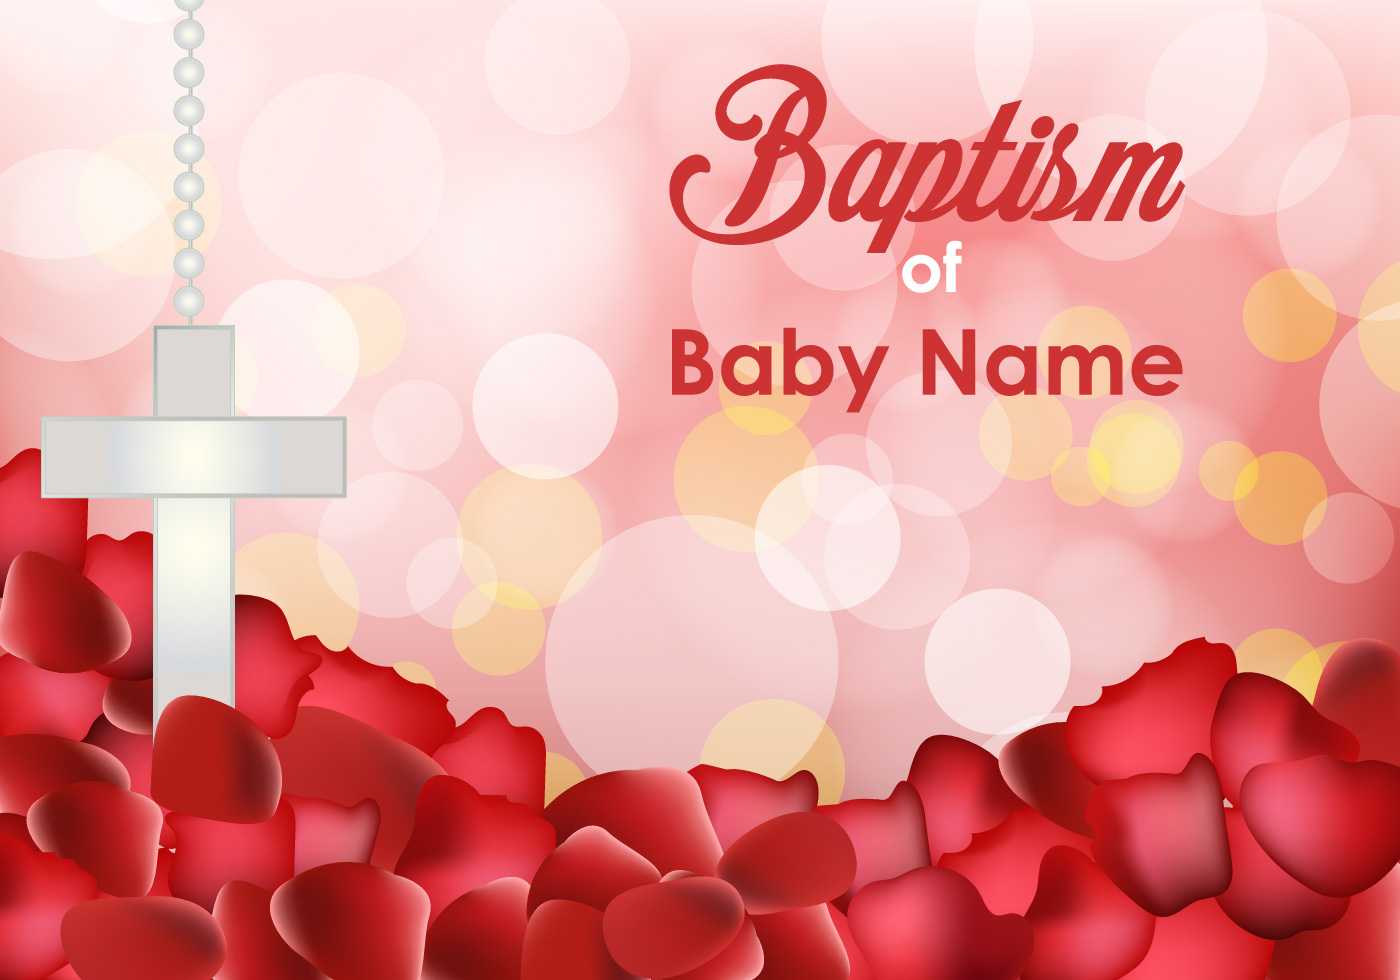 Baptism Invitation Templates – Download Free Vectors With Regard To Christening Banner Template Free